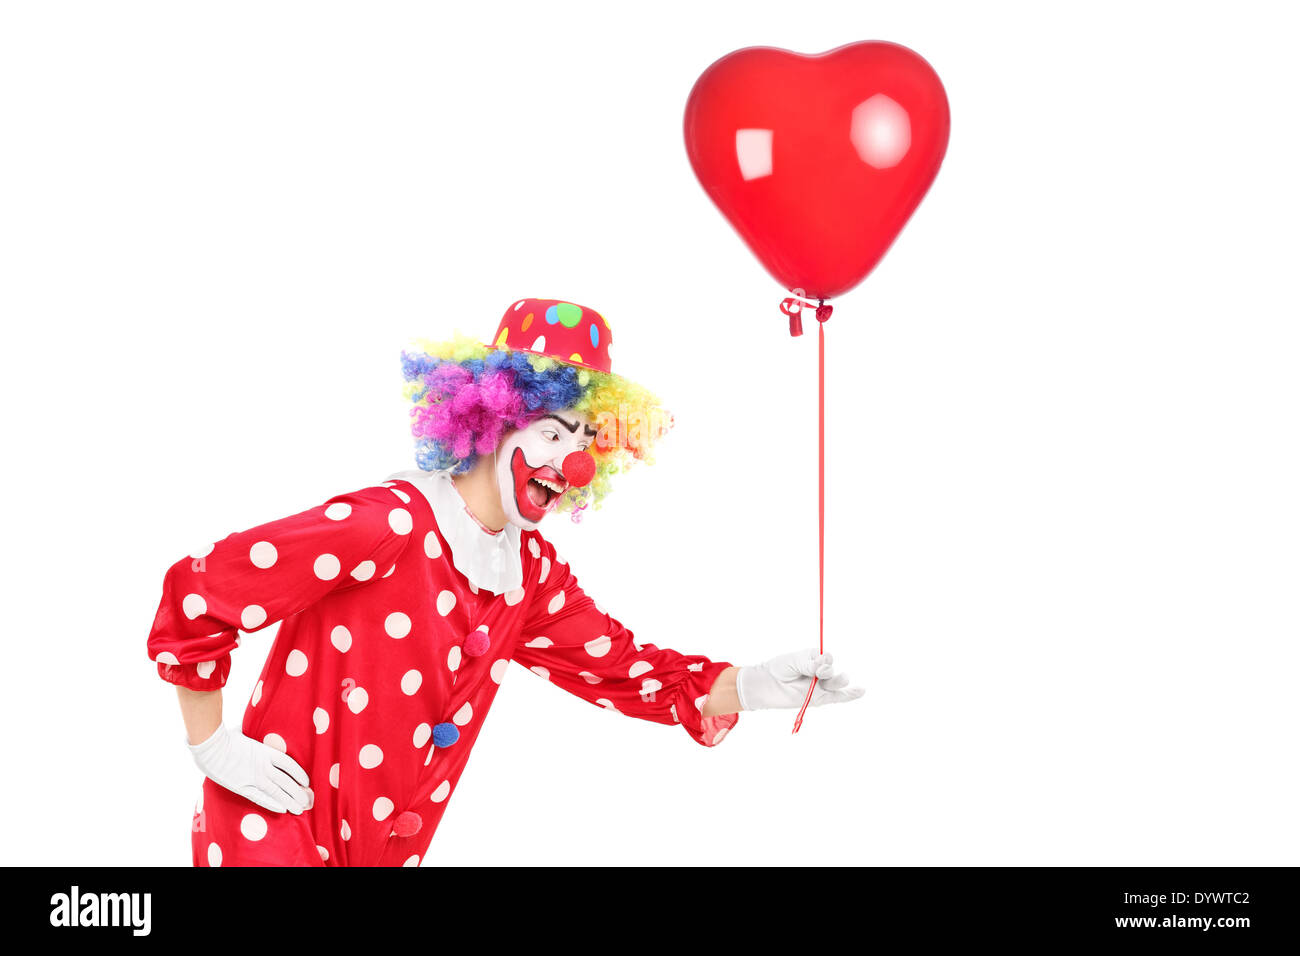 Male clown holding a red balloon Stock Photo